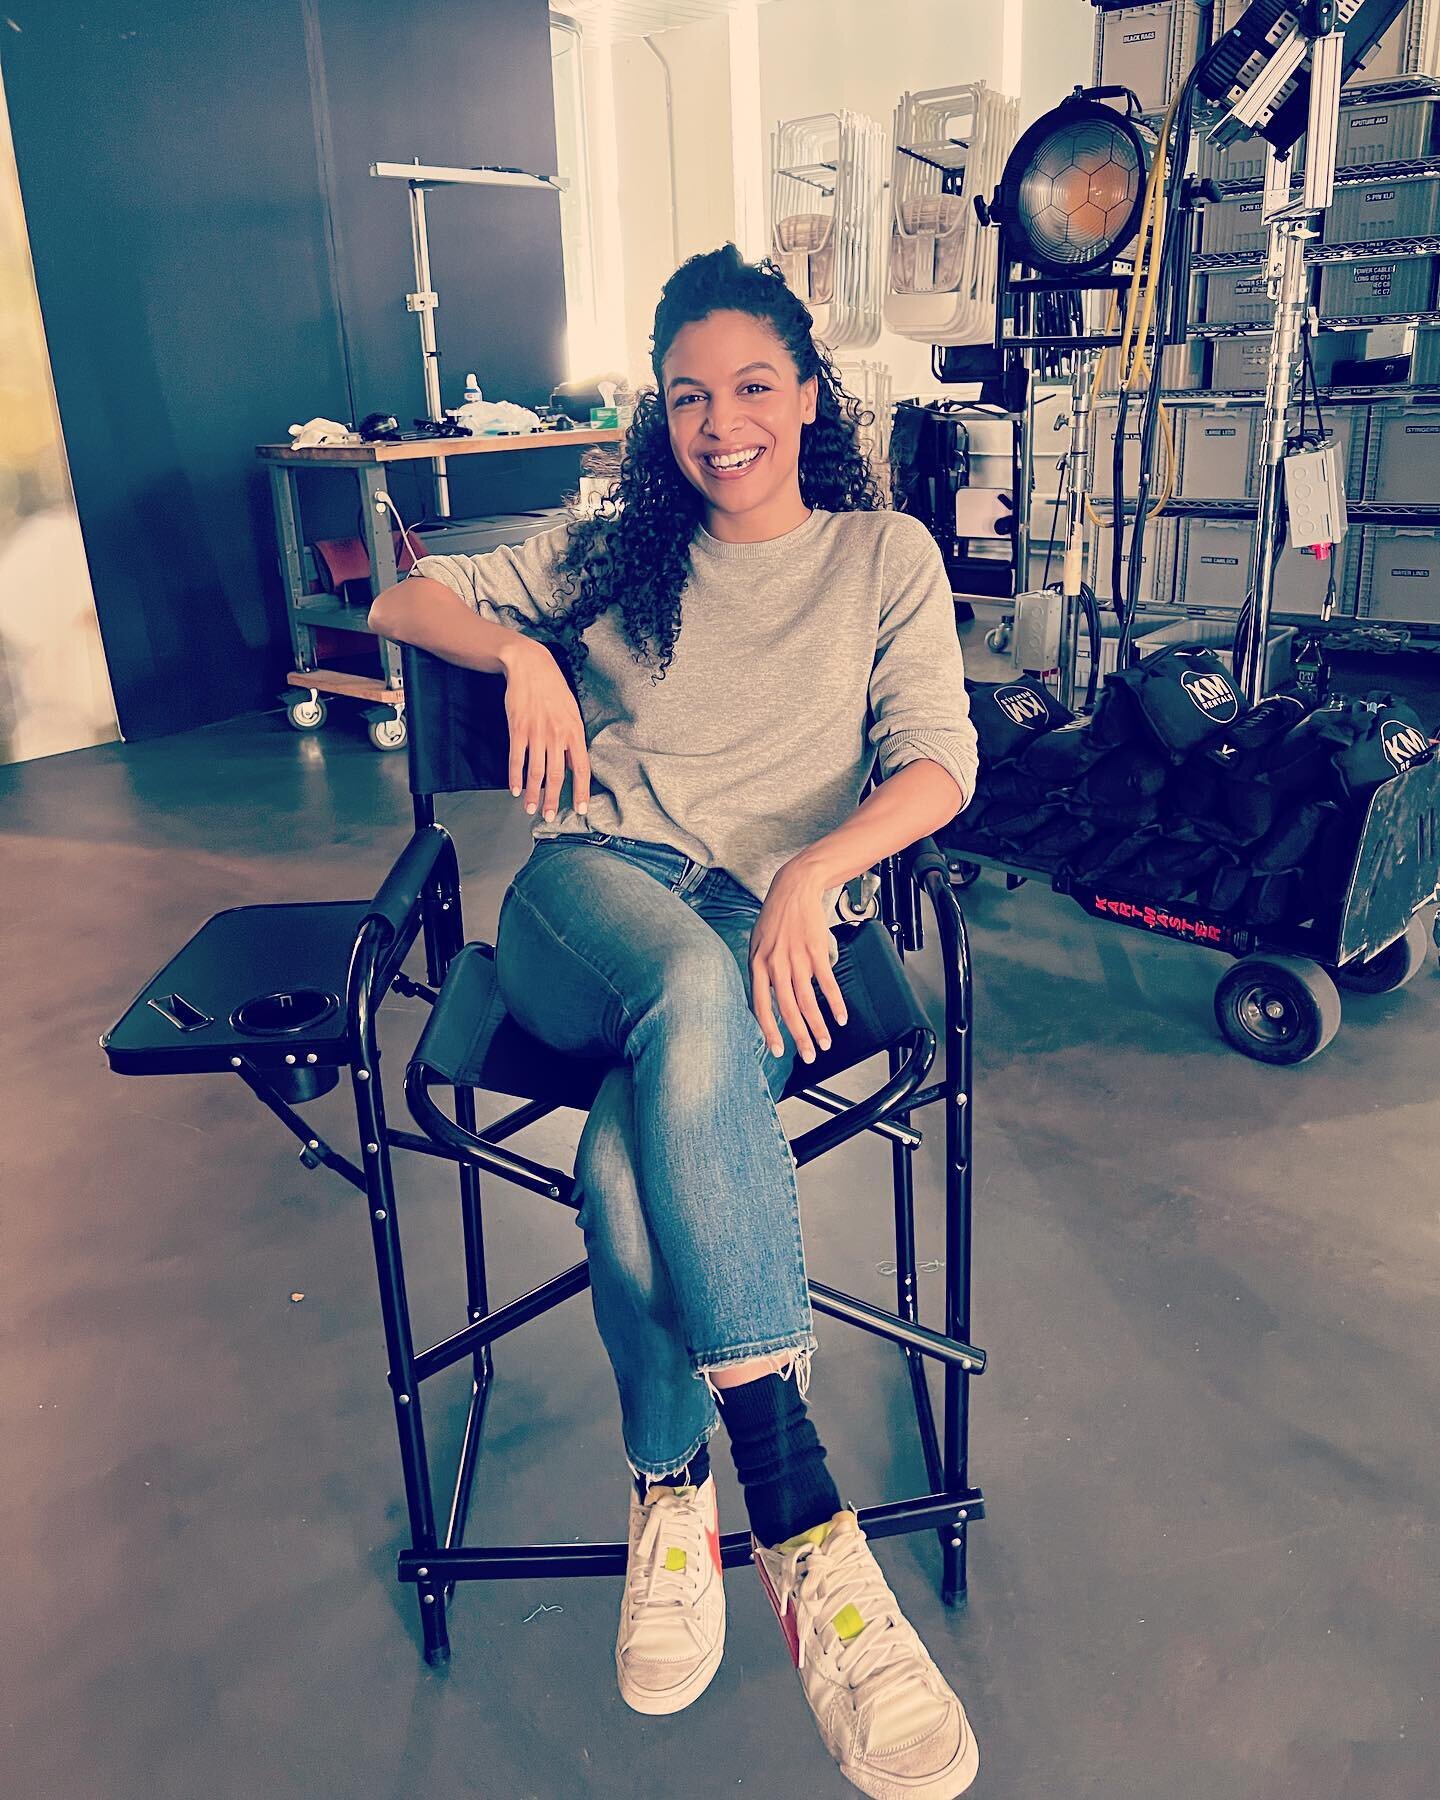 @hanzifilms had me sitting in this fancy chair today and @ariaofny gave me some of that glow-from-within kind of glow and LISTEN we&rsquo;ll take this energy for International Women&rsquo;s Day! 

(This app turned being grateful into a cliche, but I 